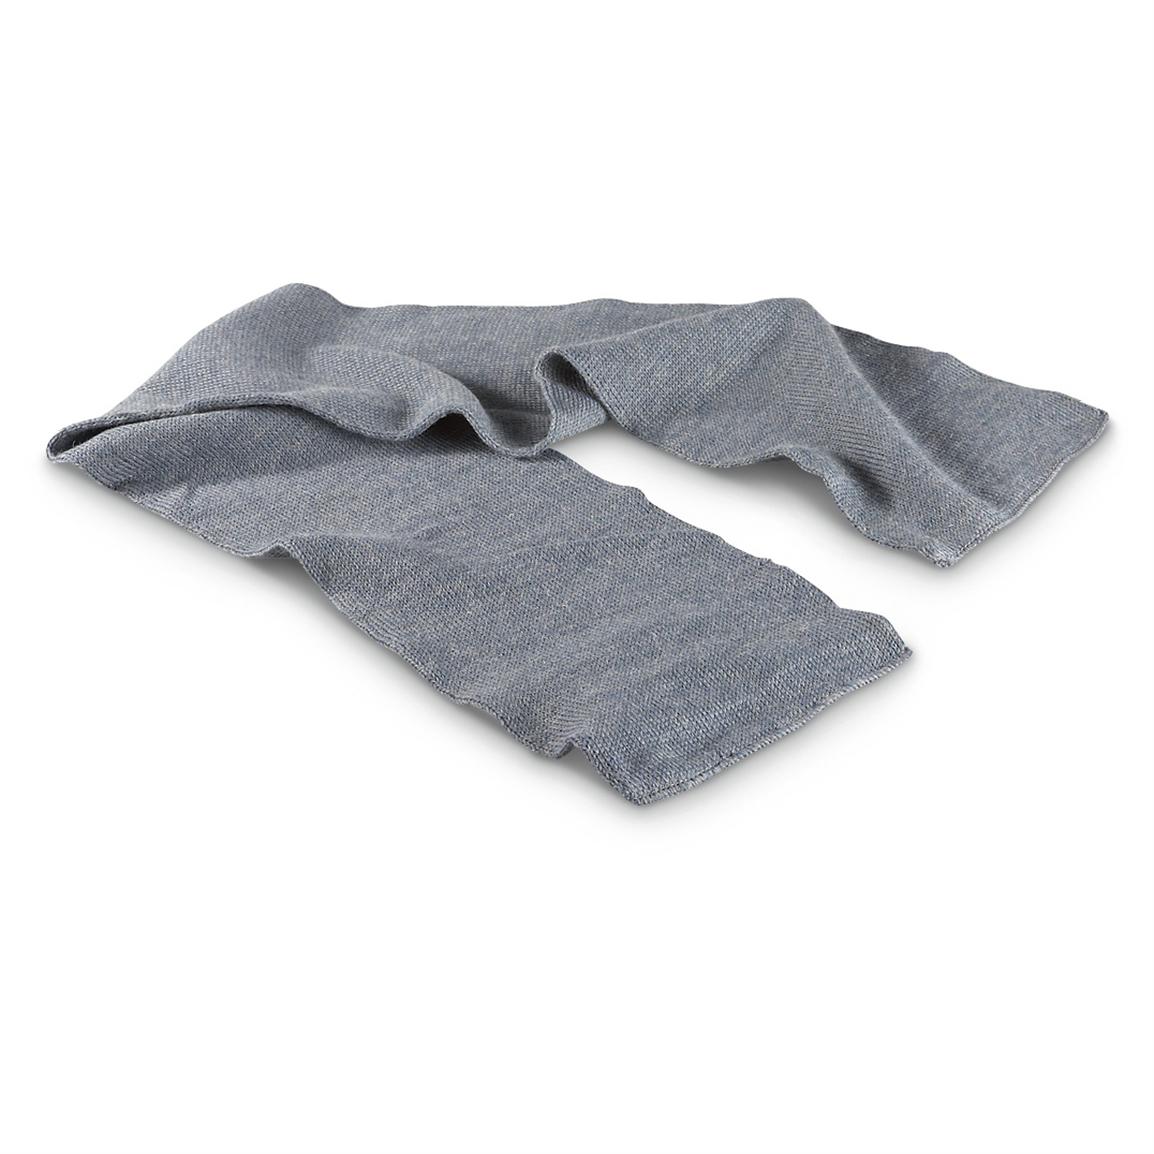 5 Used Swedish Military Wool Scarves, Gray